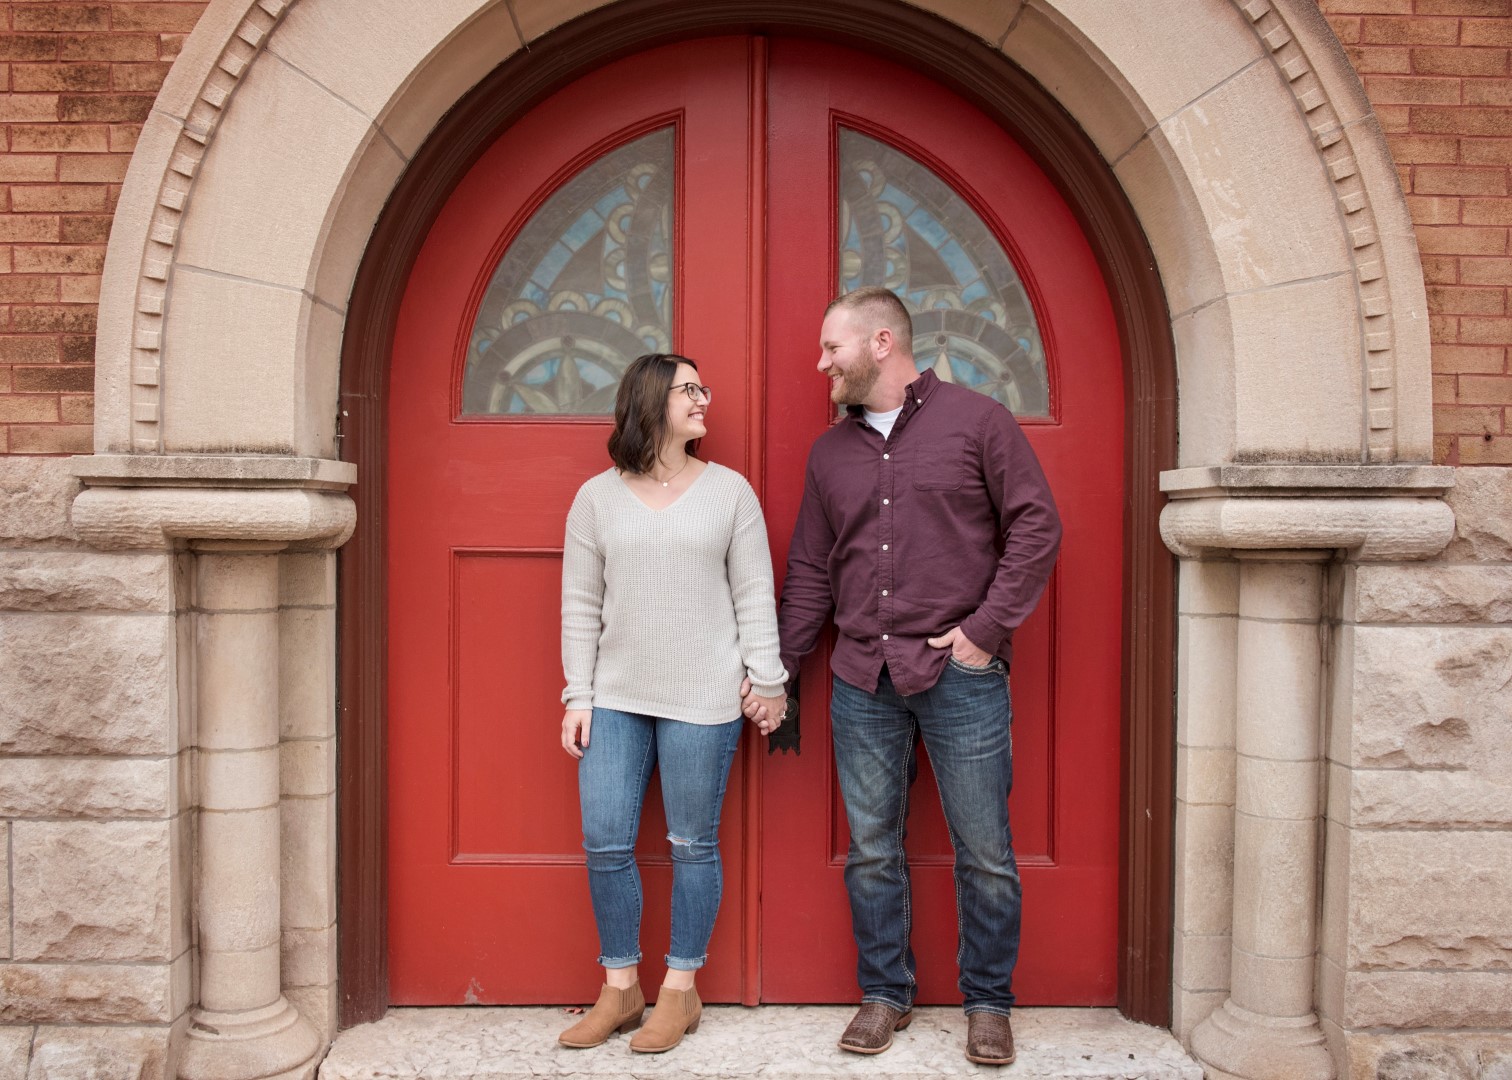 Brittany+Zach_2018_Eng_39 (Large).jpg